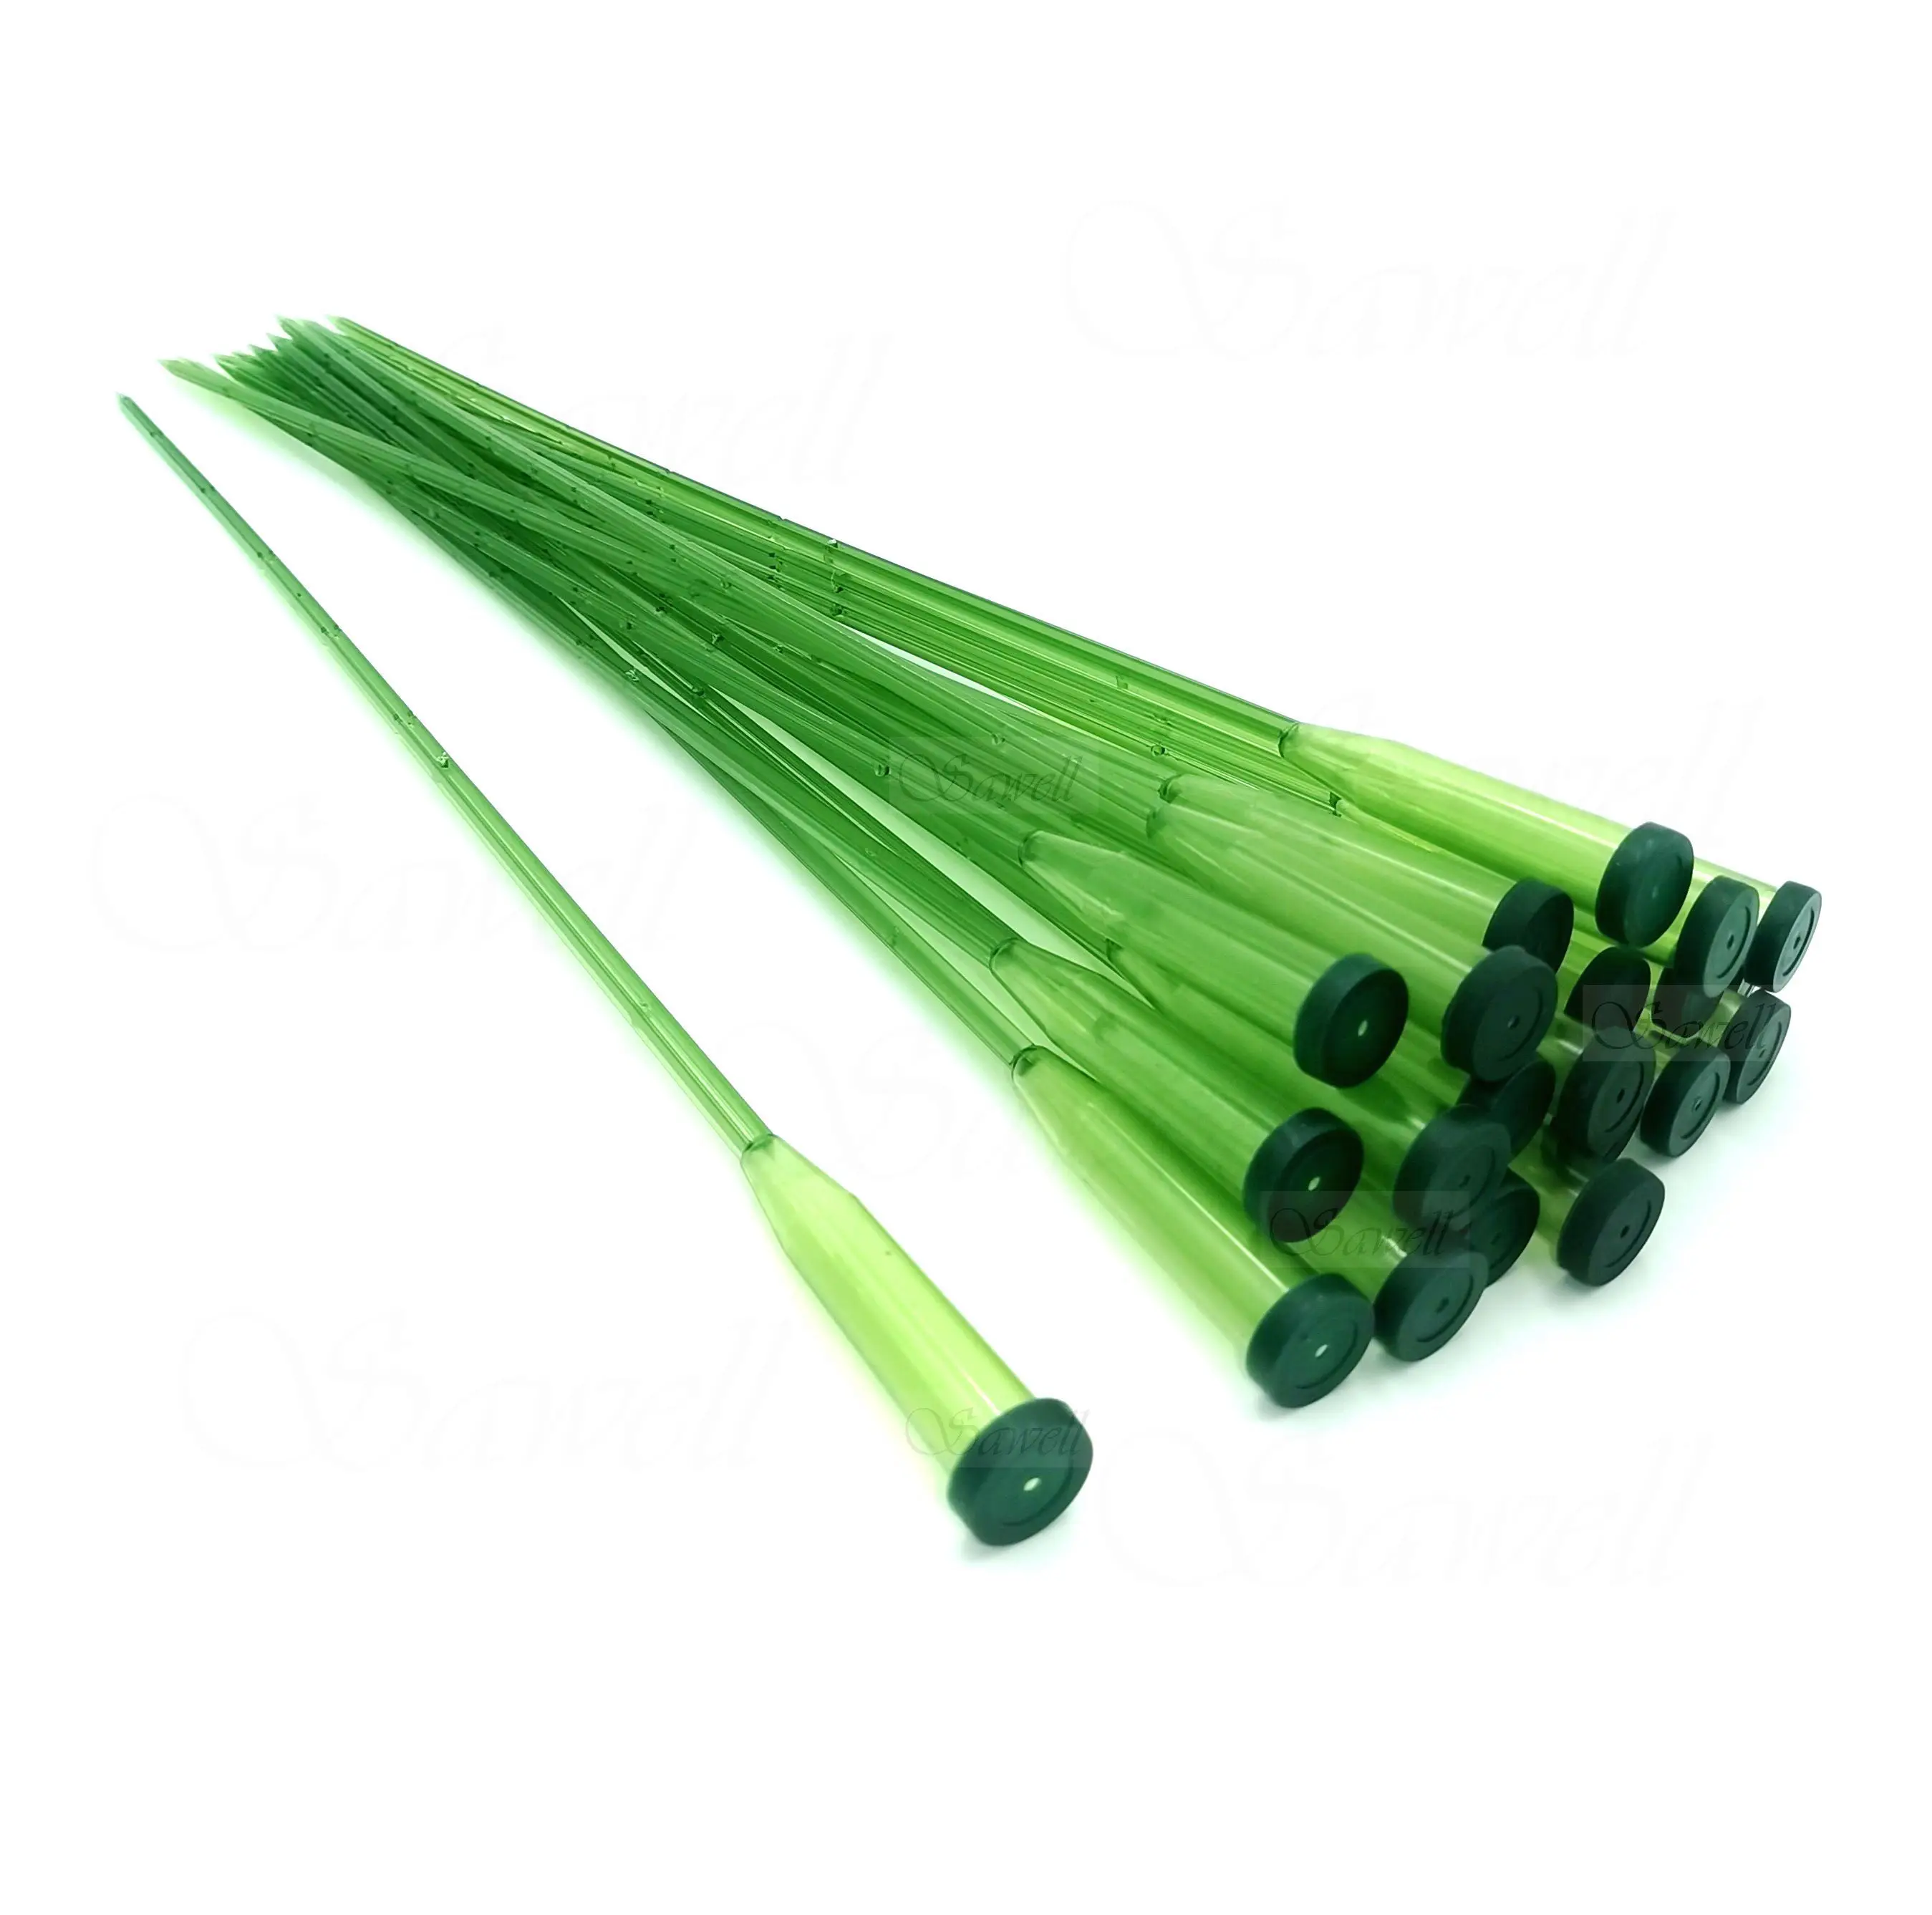 Floral Water Tubes/Vials for Flower Arrangements by Royal Imports, Green -  4.5 (1/2 Opening) - Pointed Style - 100/Pack - w/Caps